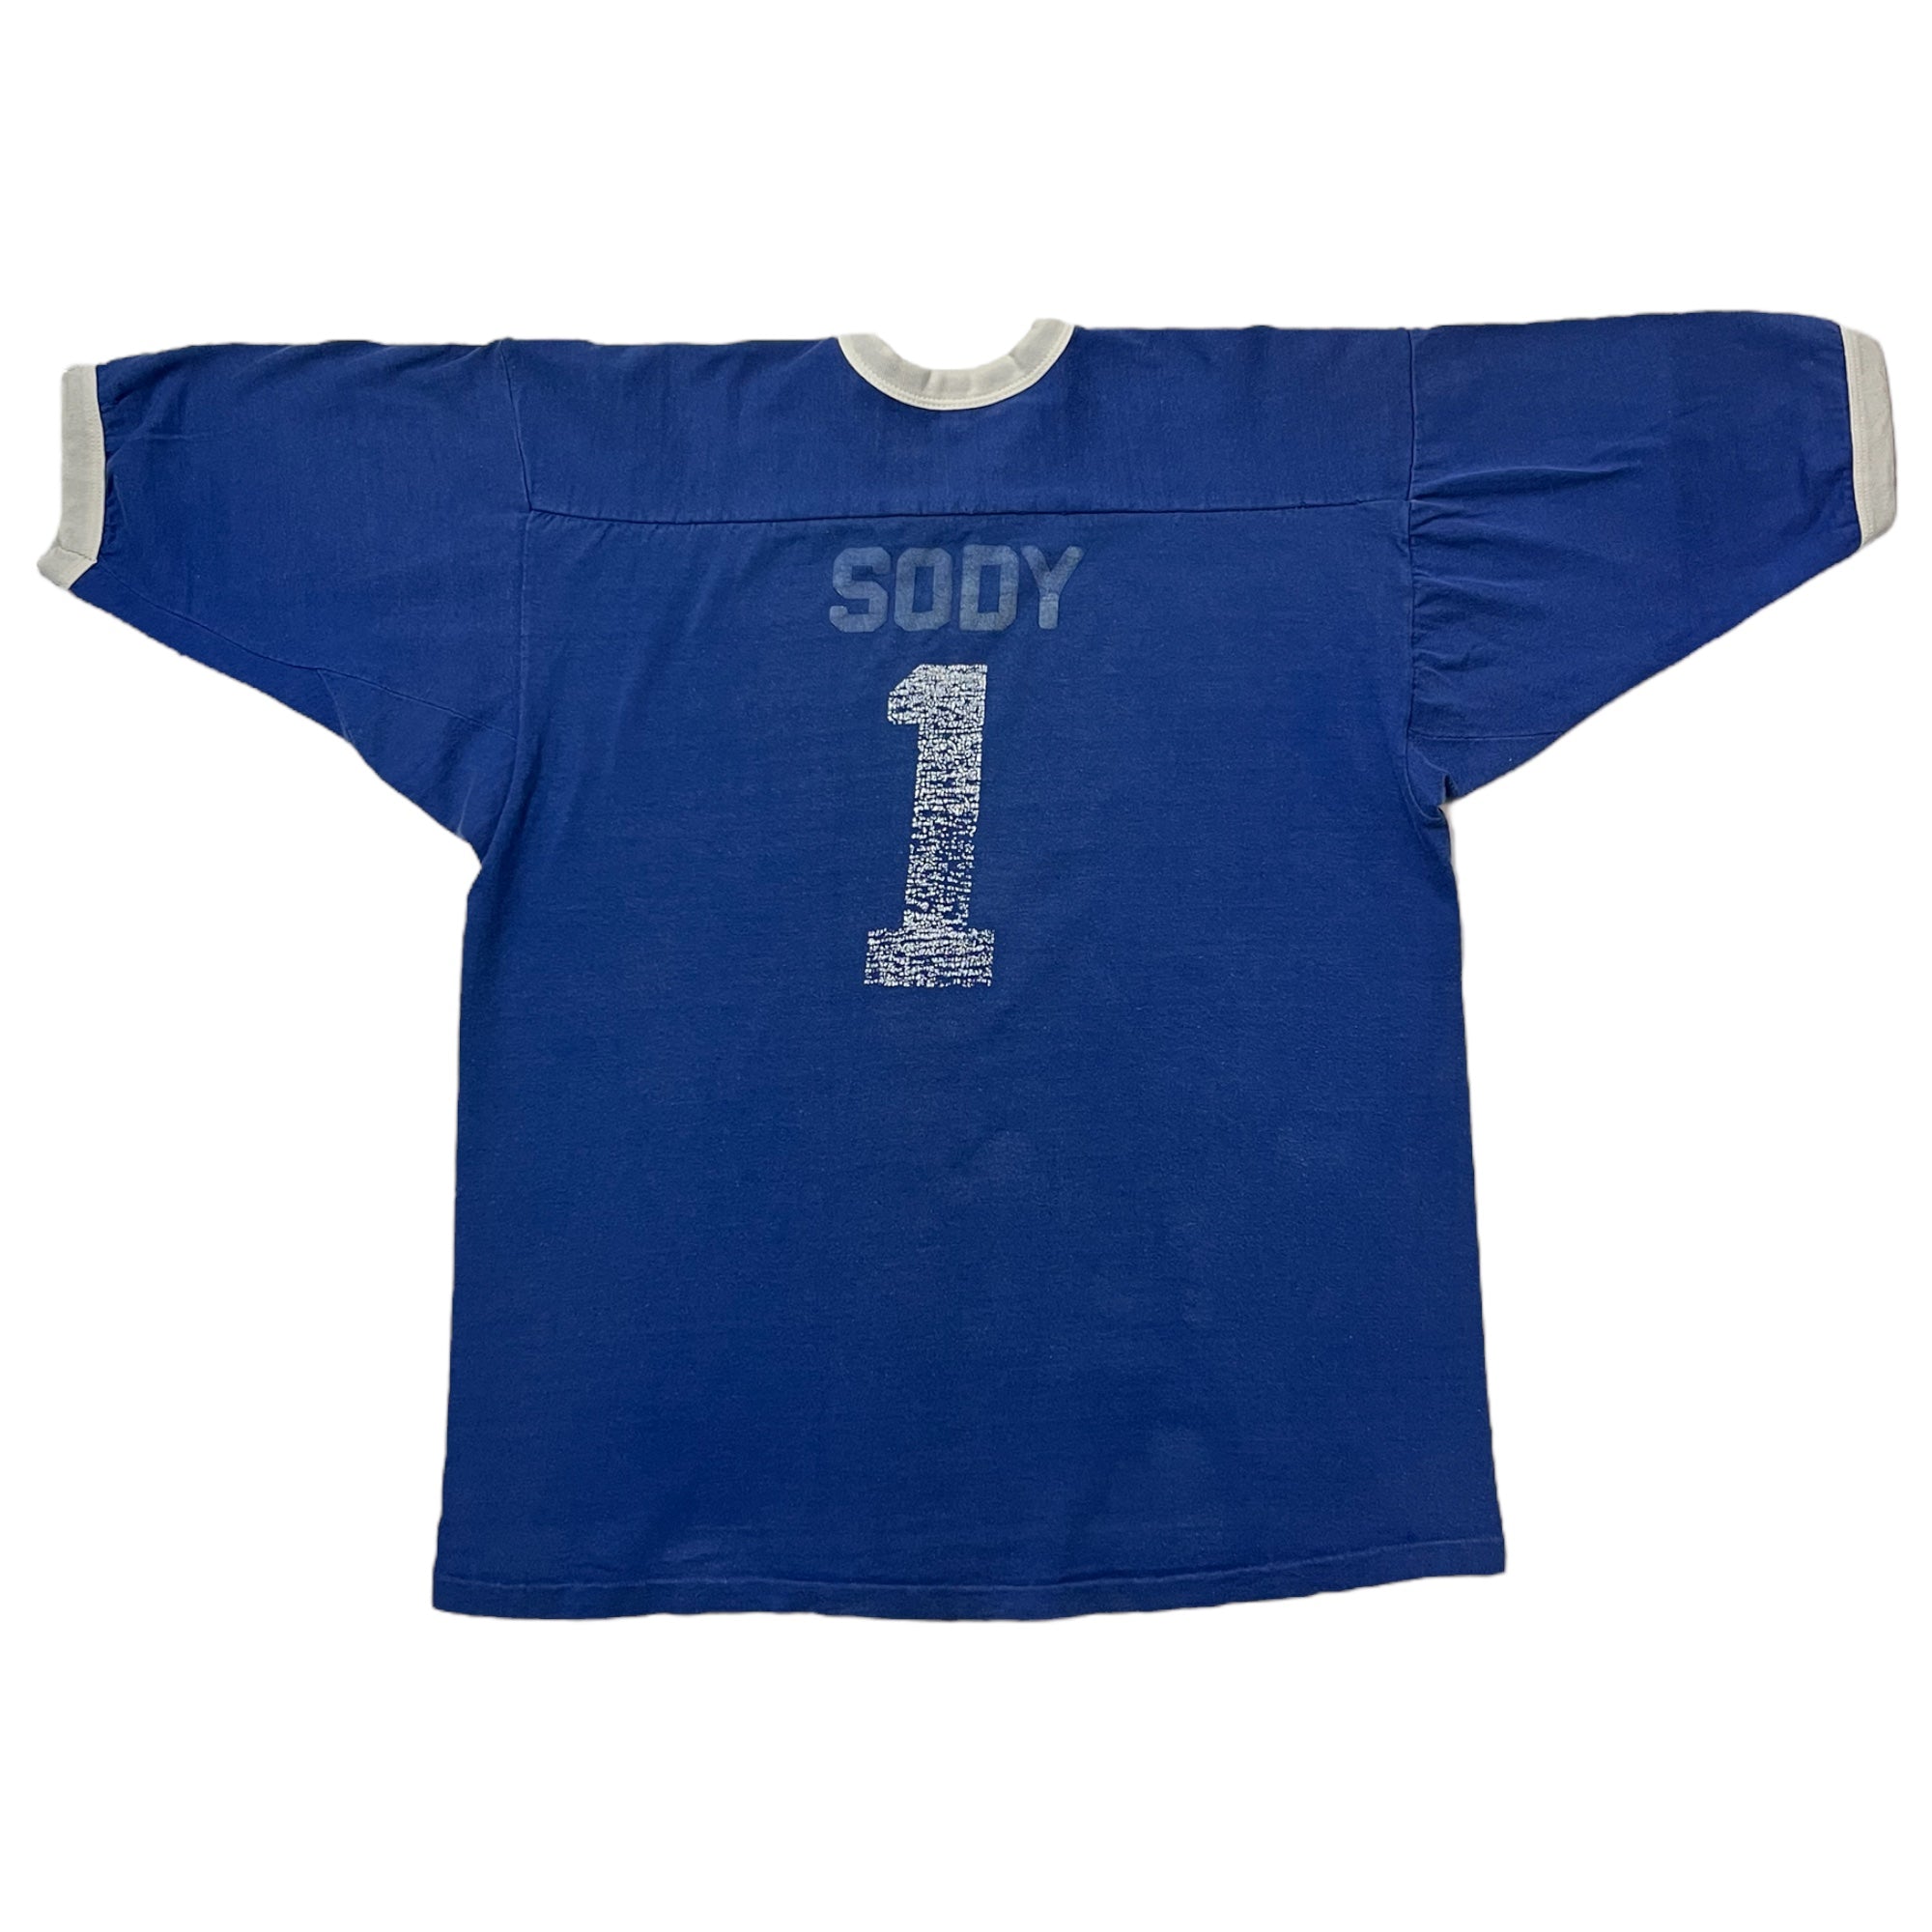 ‘60s/70s ‘Looking for a Pussy’ Cotton Football Shirt - Team Blue - L/XL